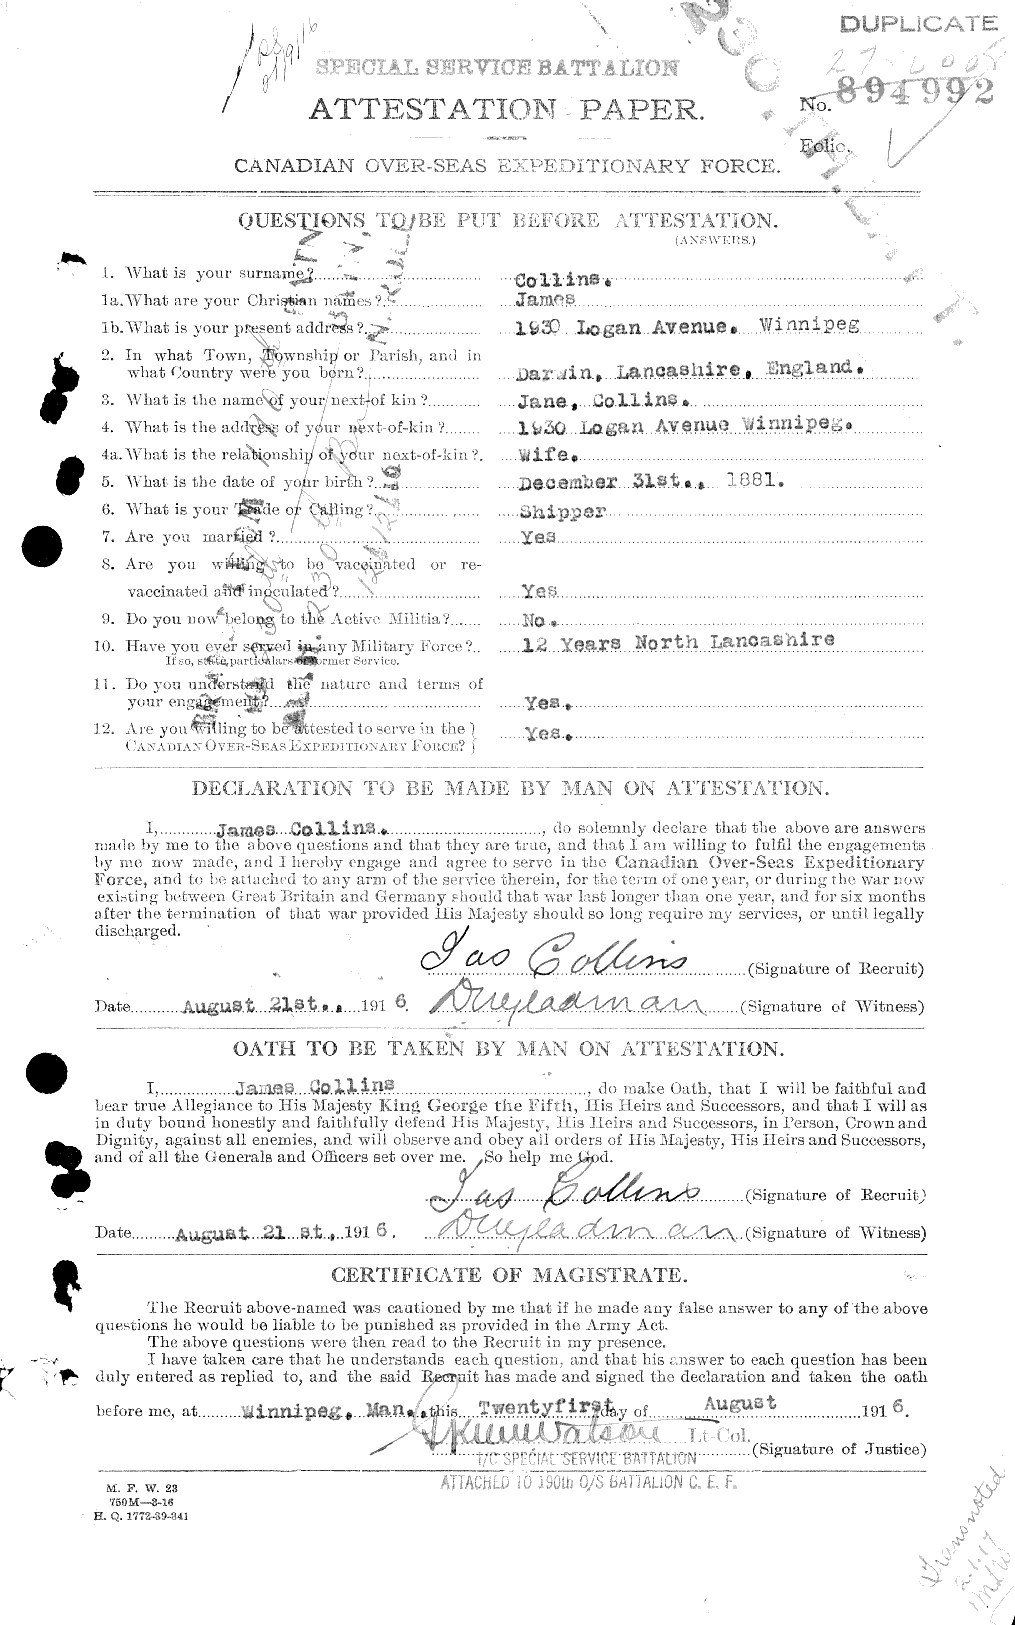 Personnel Records of the First World War - CEF 037921a